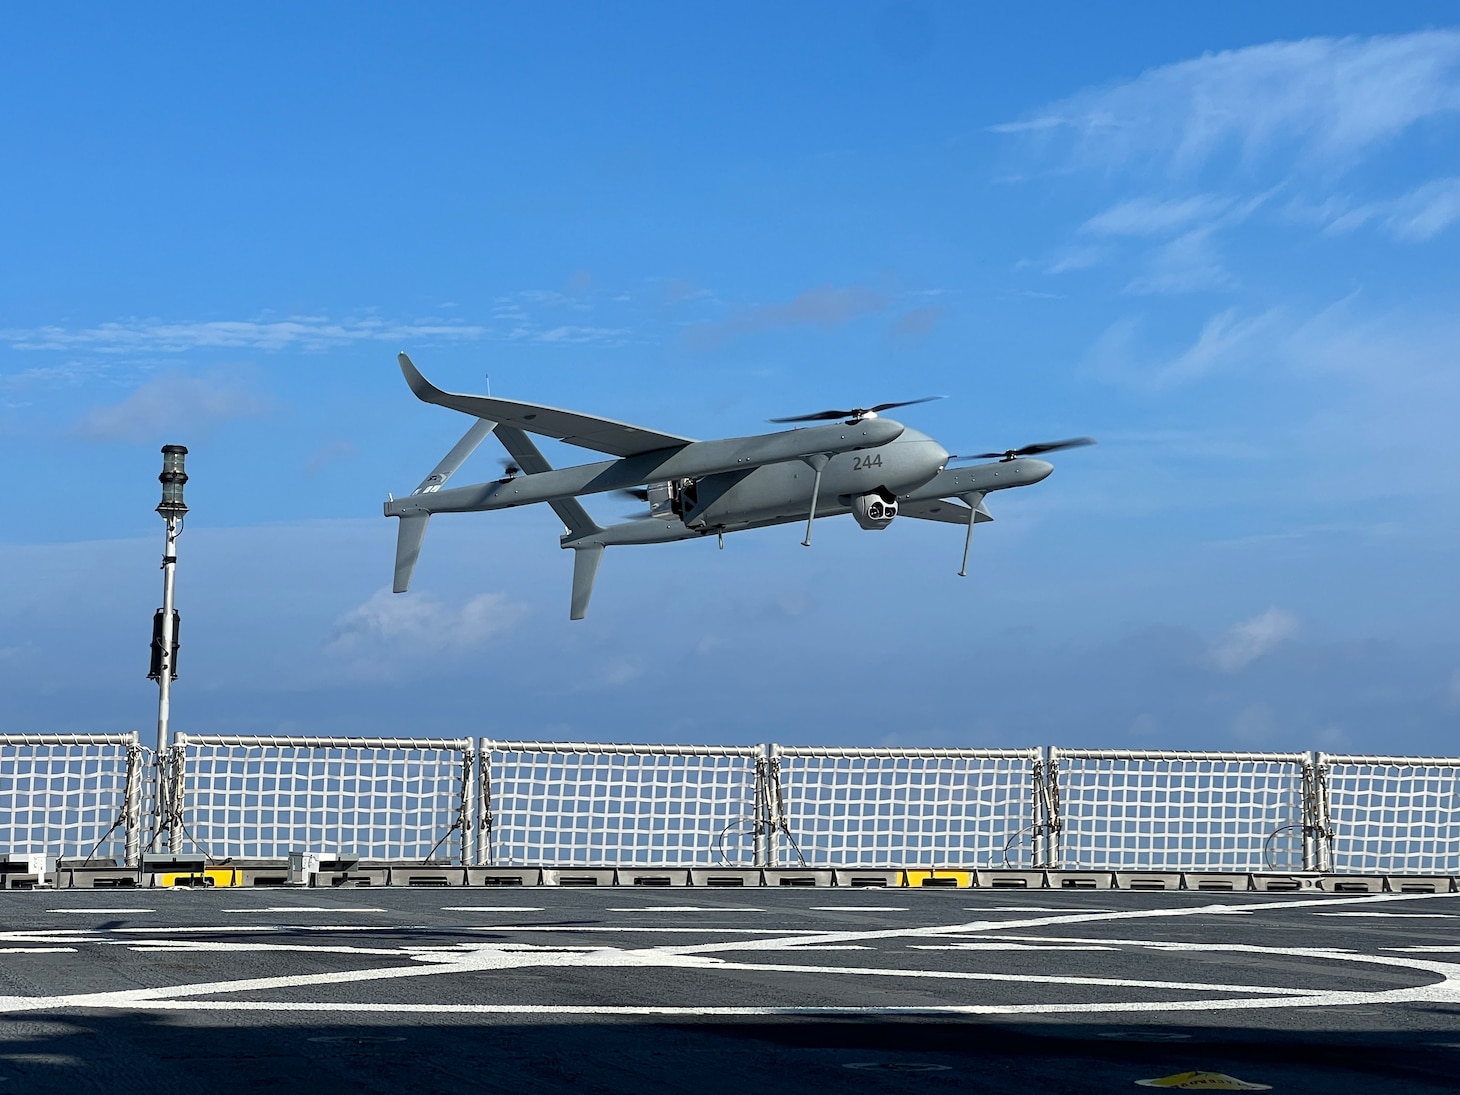 An Aerosonde unmanned aircraft system launches from the flight deck of Spearhead-class expeditionary fast transport ship USNS Burlington (T-EPF 10) during U.S. 4th Fleet’s Hybrid Fleet Campaign Event in the Atlantic Ocean October 10, 2023. Today the Aerosonde provided aerial targeting information and visual confirmation, allowing an unmanned surface vehicle to fire an inert Poniard rocket at an afloat target, and then perform battle damage assessment, marking the first complete unmanned kill chain for these systems. The Hybrid Fleet Campaign Event, previously referred to as Fleet Experimentation Program (FLEX), provides an opportunity for the Office of Naval Research’s Scientists-to-Sea program to witness research and development progress for, and demonstrations of, unmanned systems and their adaptations in support of the Chief of Naval Operations Navigation Plan 2022.